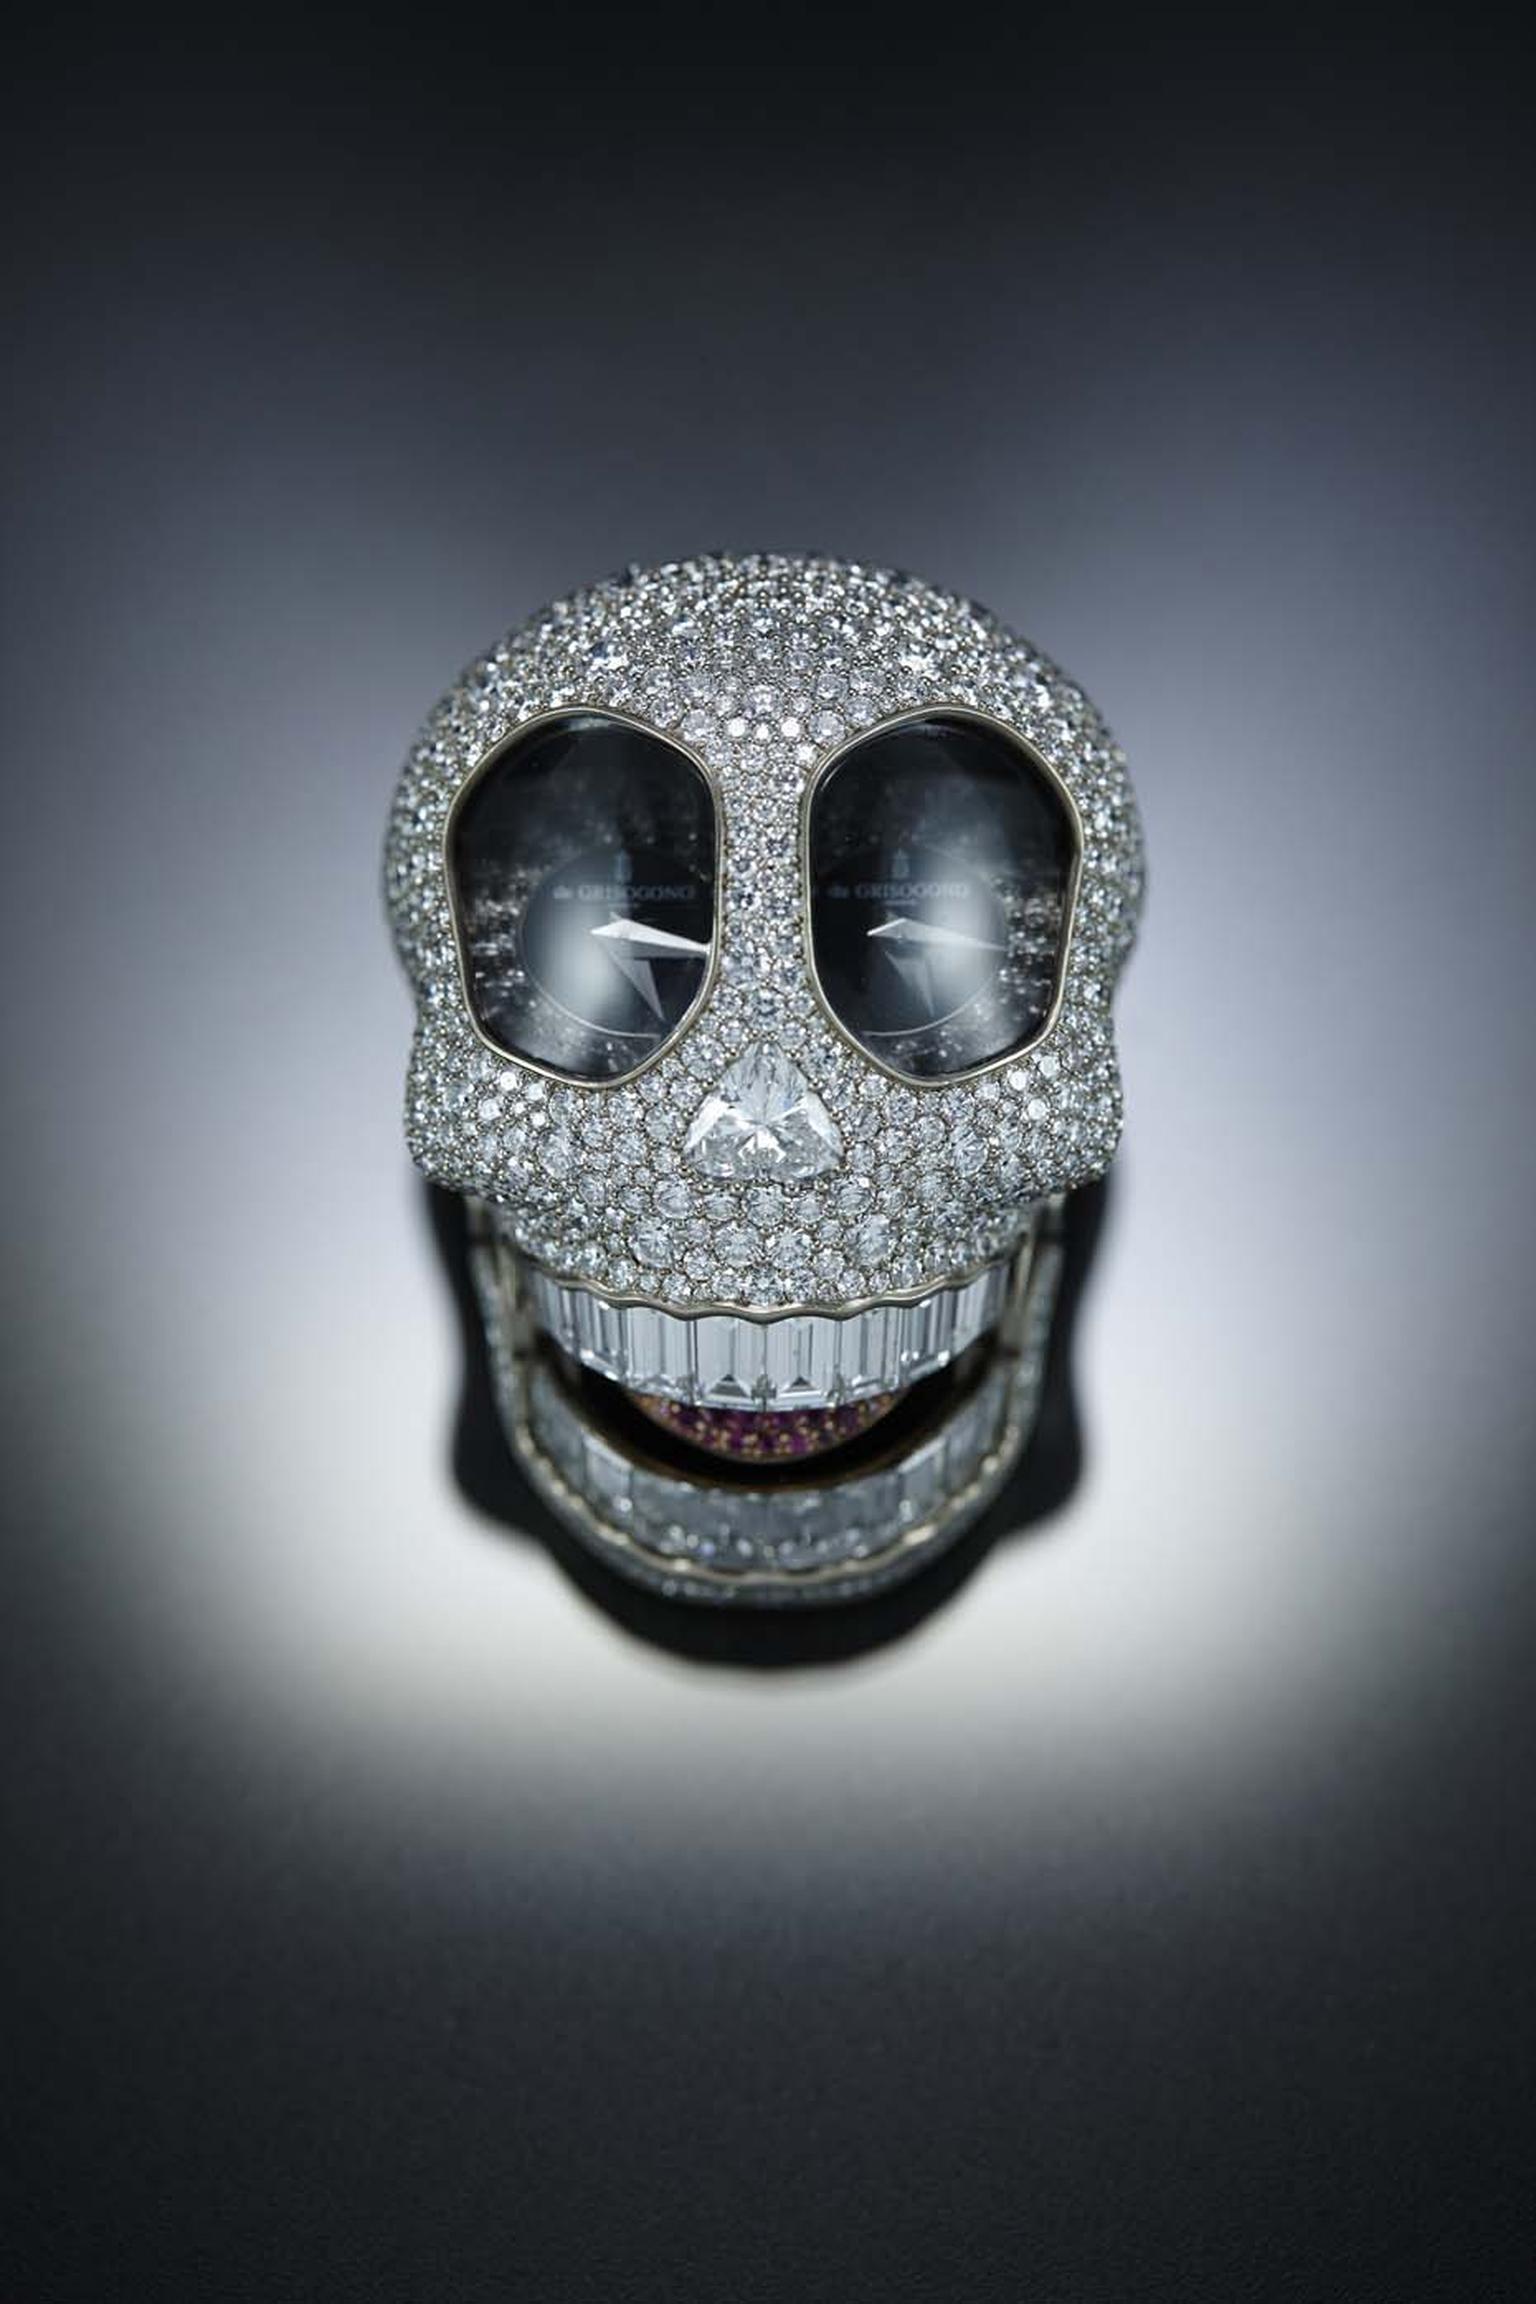 The de GRISOGONO Crazy Skull watch features a snow-set skull with 890 white or black diamonds or rubies, while the nose is represented by a heart-cut white diamond.